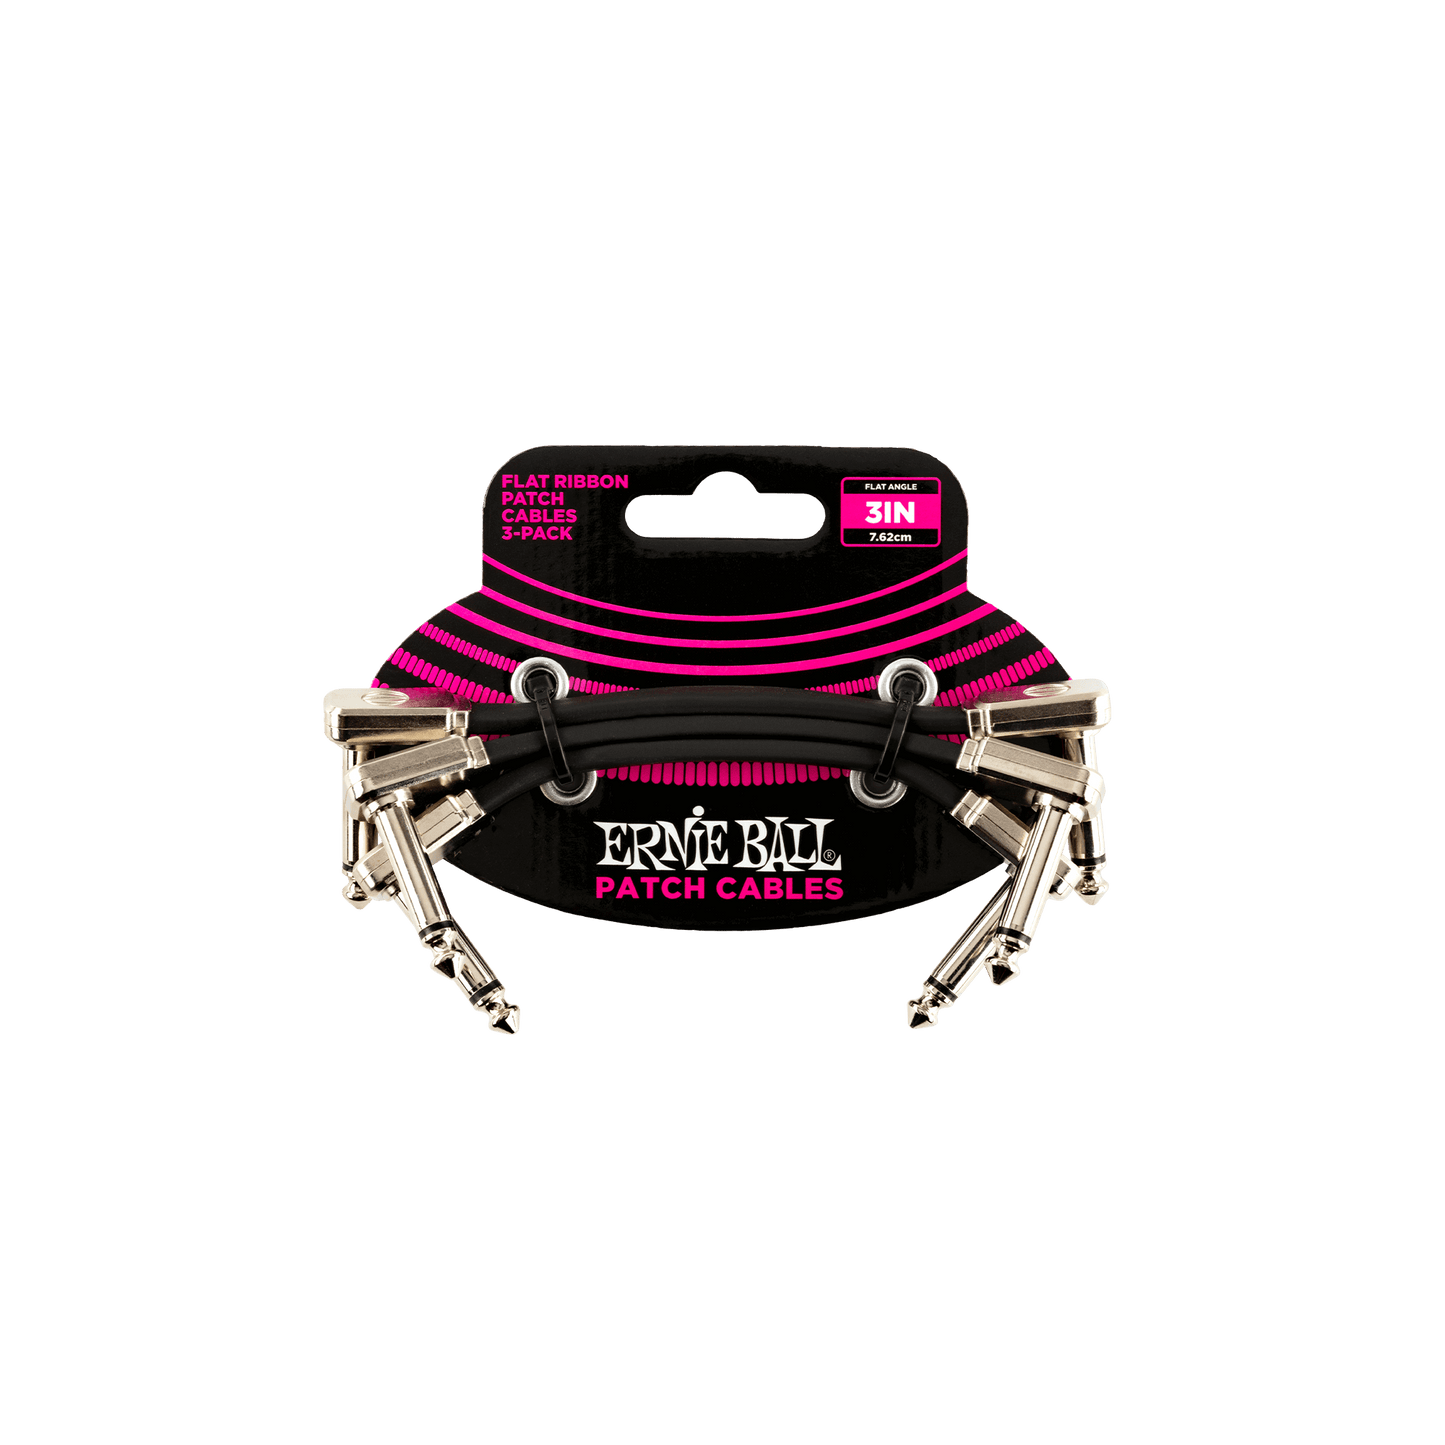 Ernie Ball Flat Ribbon Patch Cables